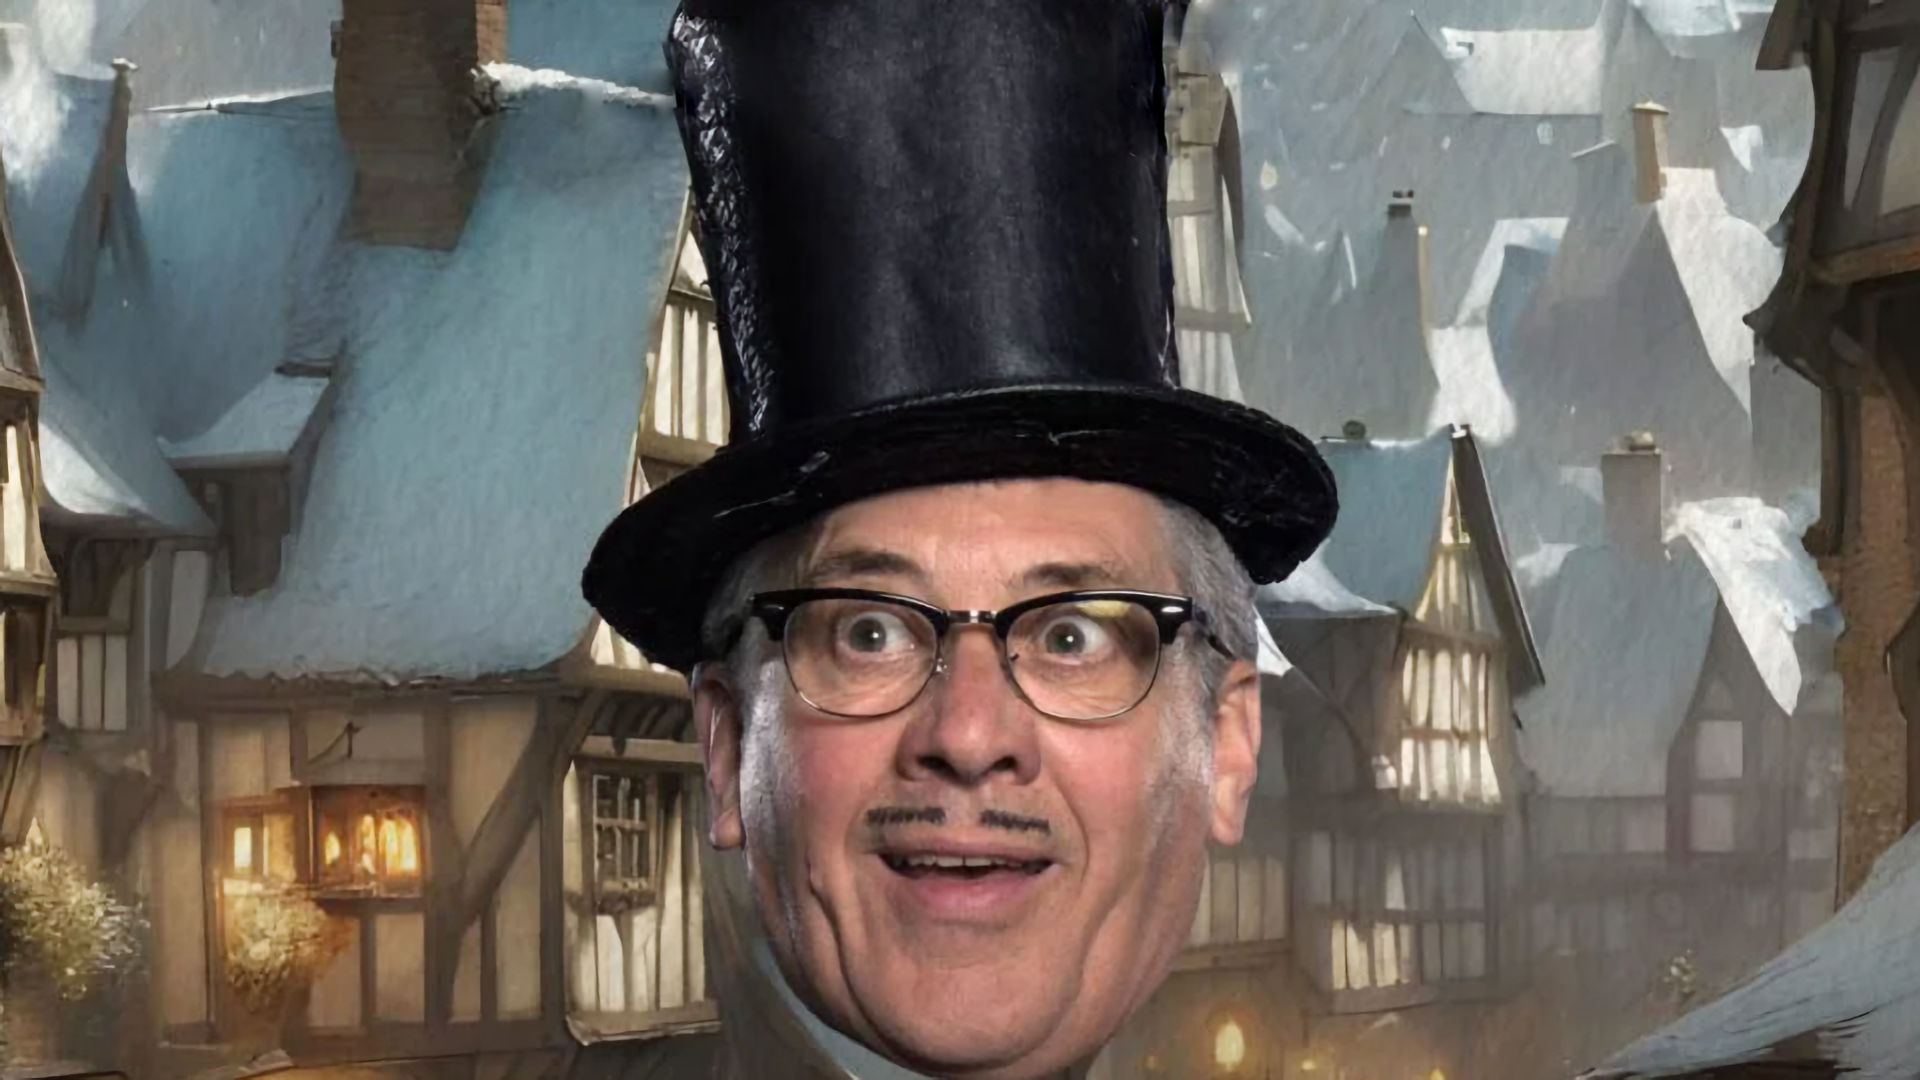 Count Arthur Strong is Charles Dickens in A Christmas Carol